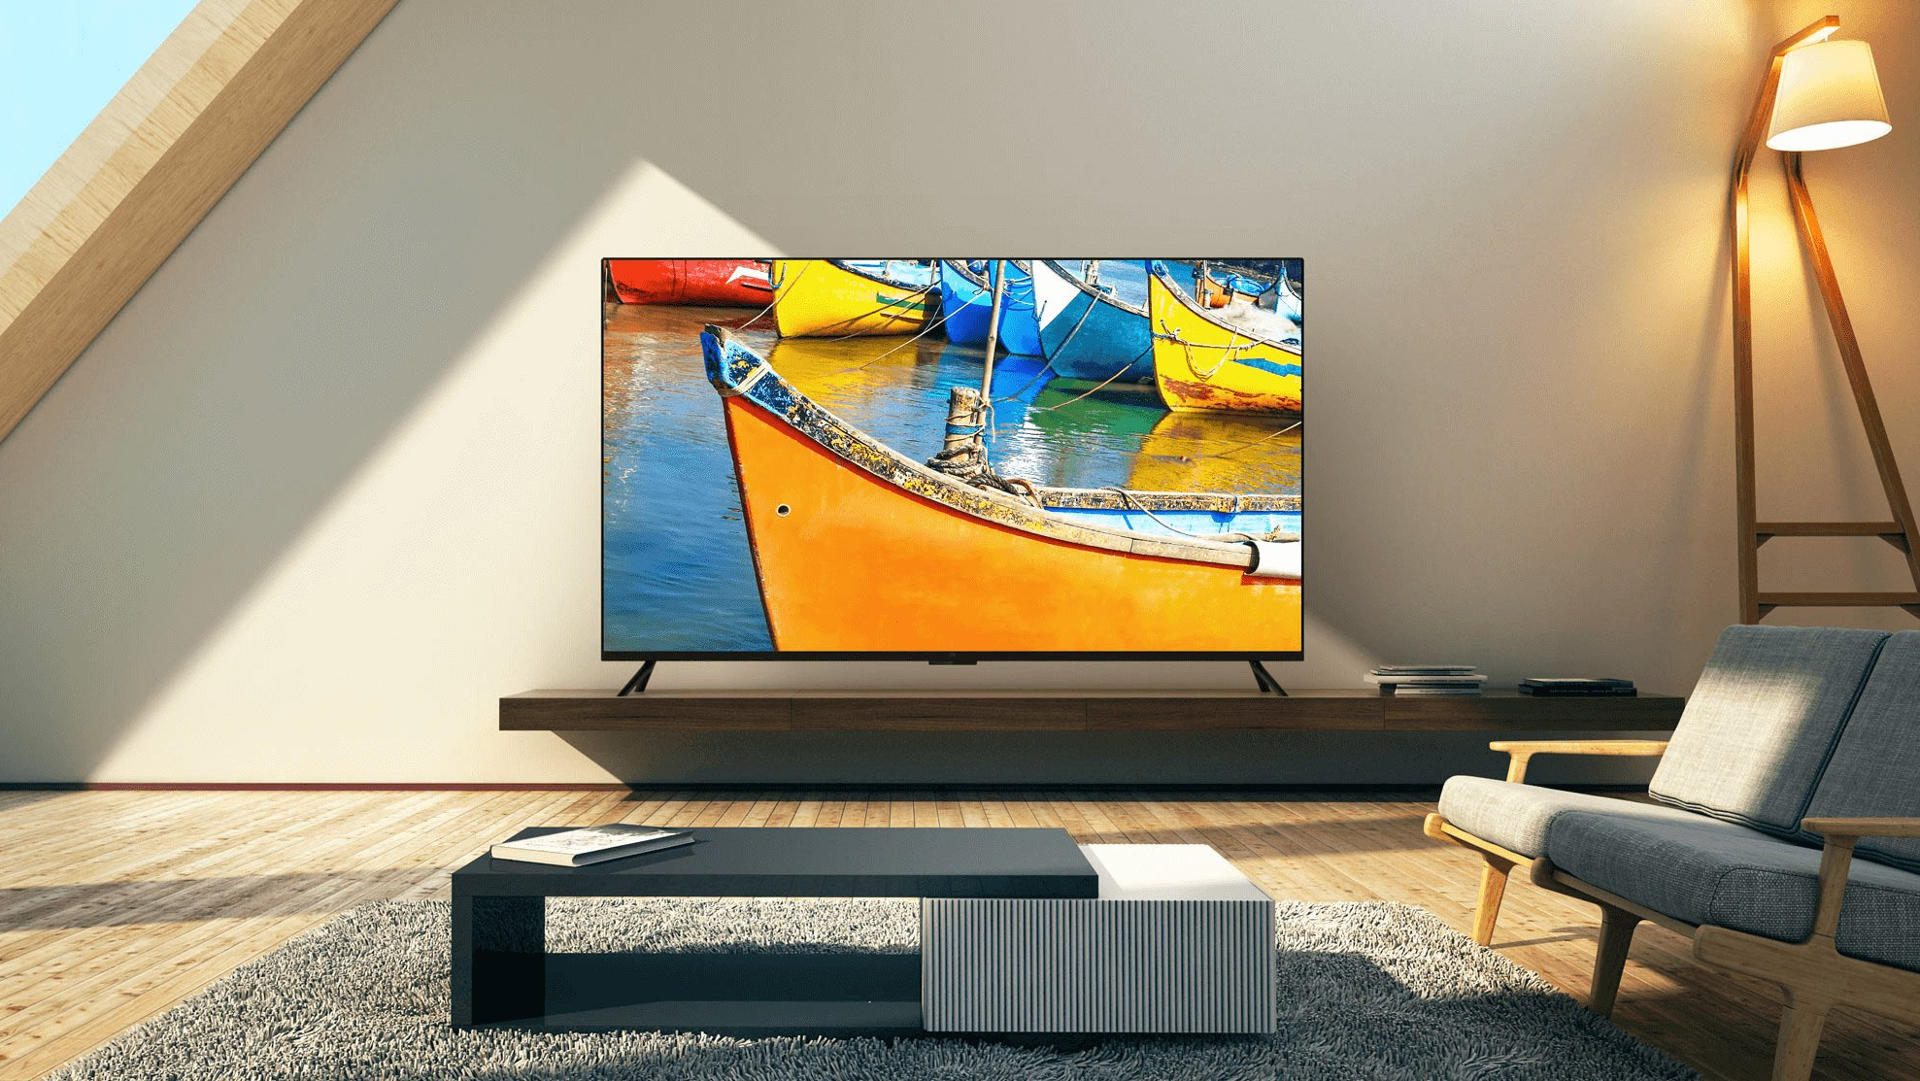 The Xiaomi Mi LED Smart TV 4 - what to expect from OnePlus in 2019.